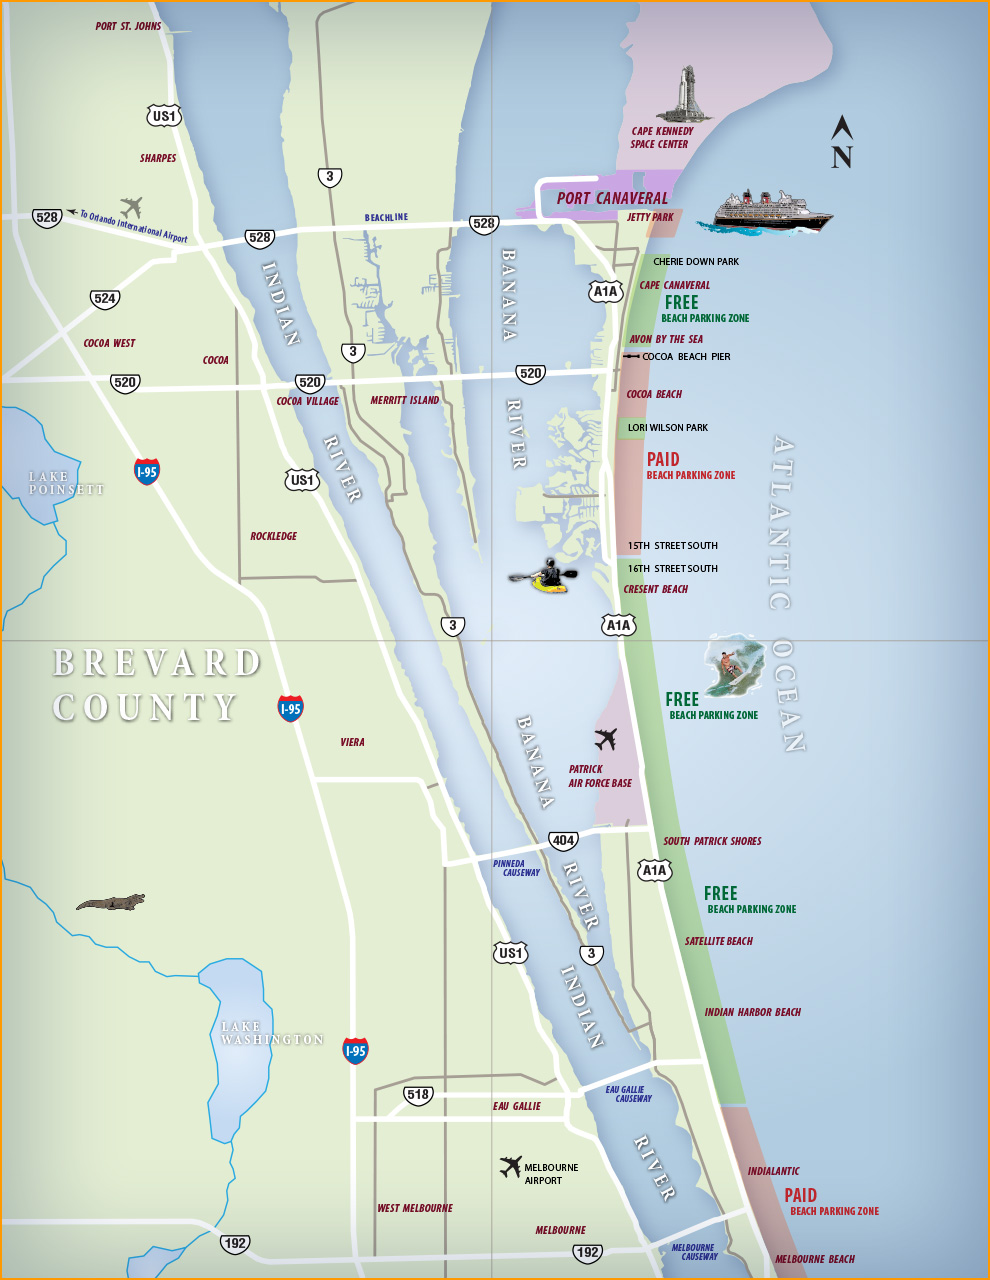 Port Canaveral Area Map 11-14-14